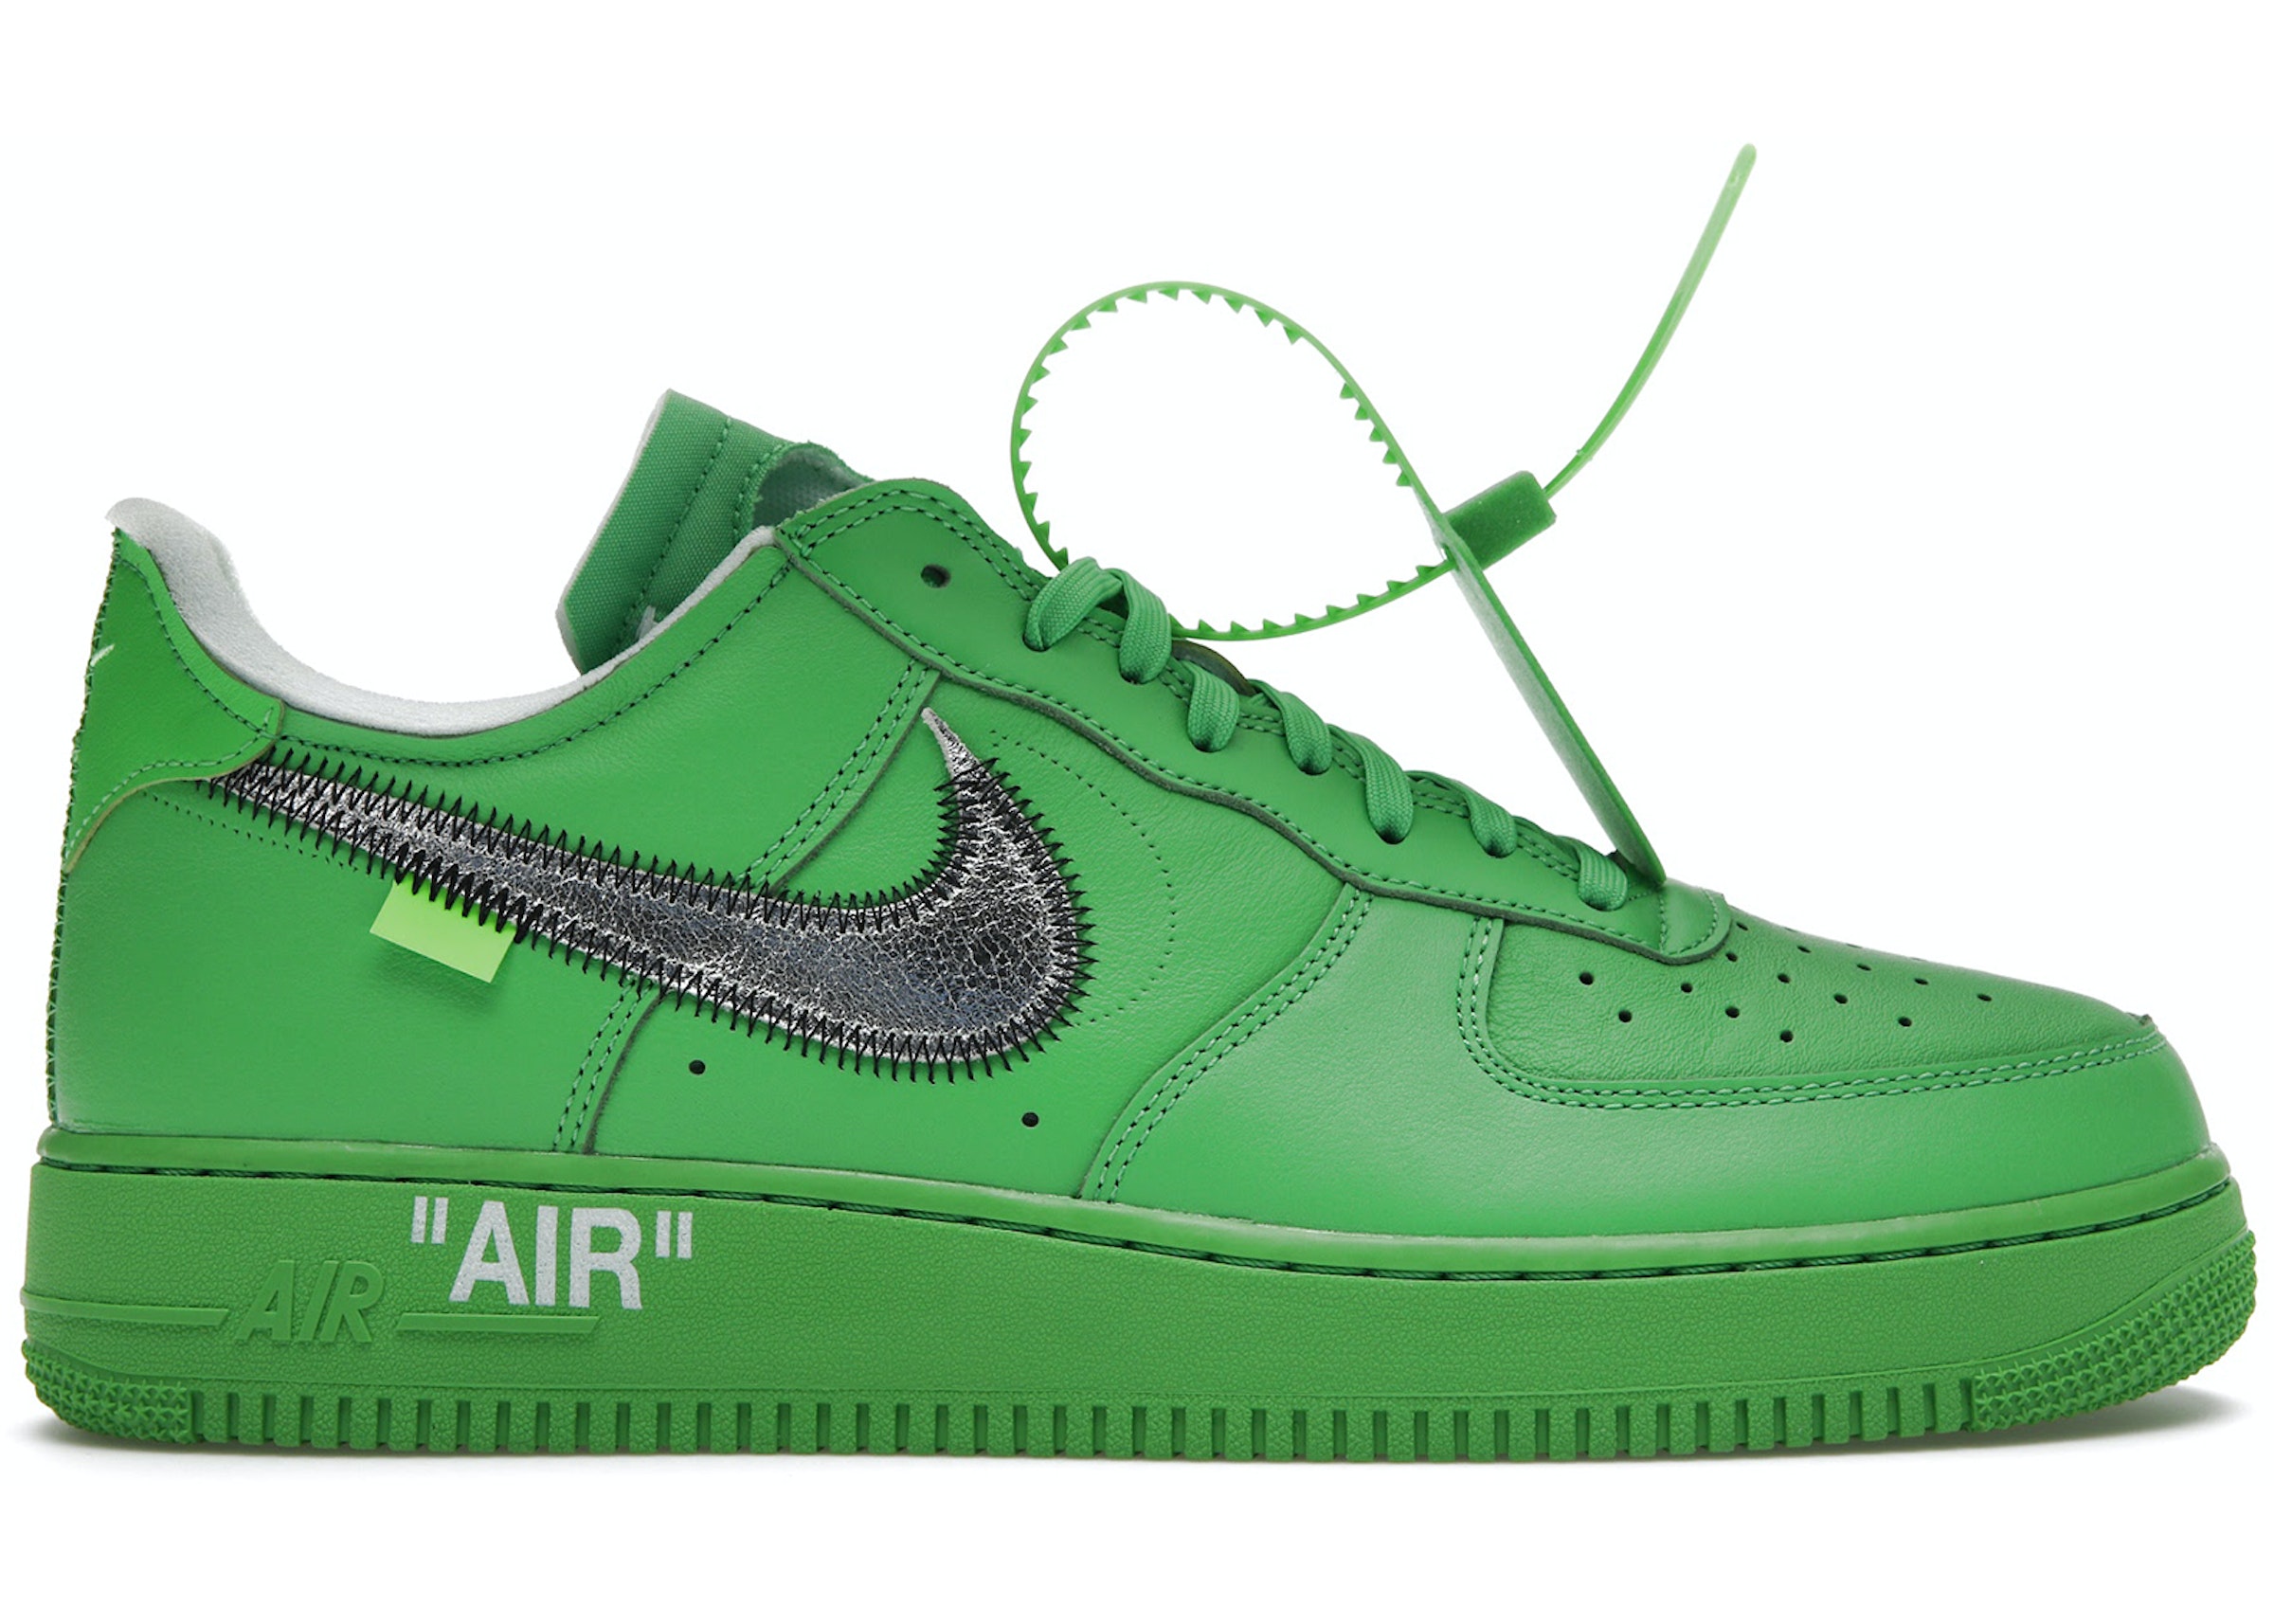 Muslo luego Agotar Nike Air Force 1 Low Off-White Brooklyn Men's - DX1419-300 - US